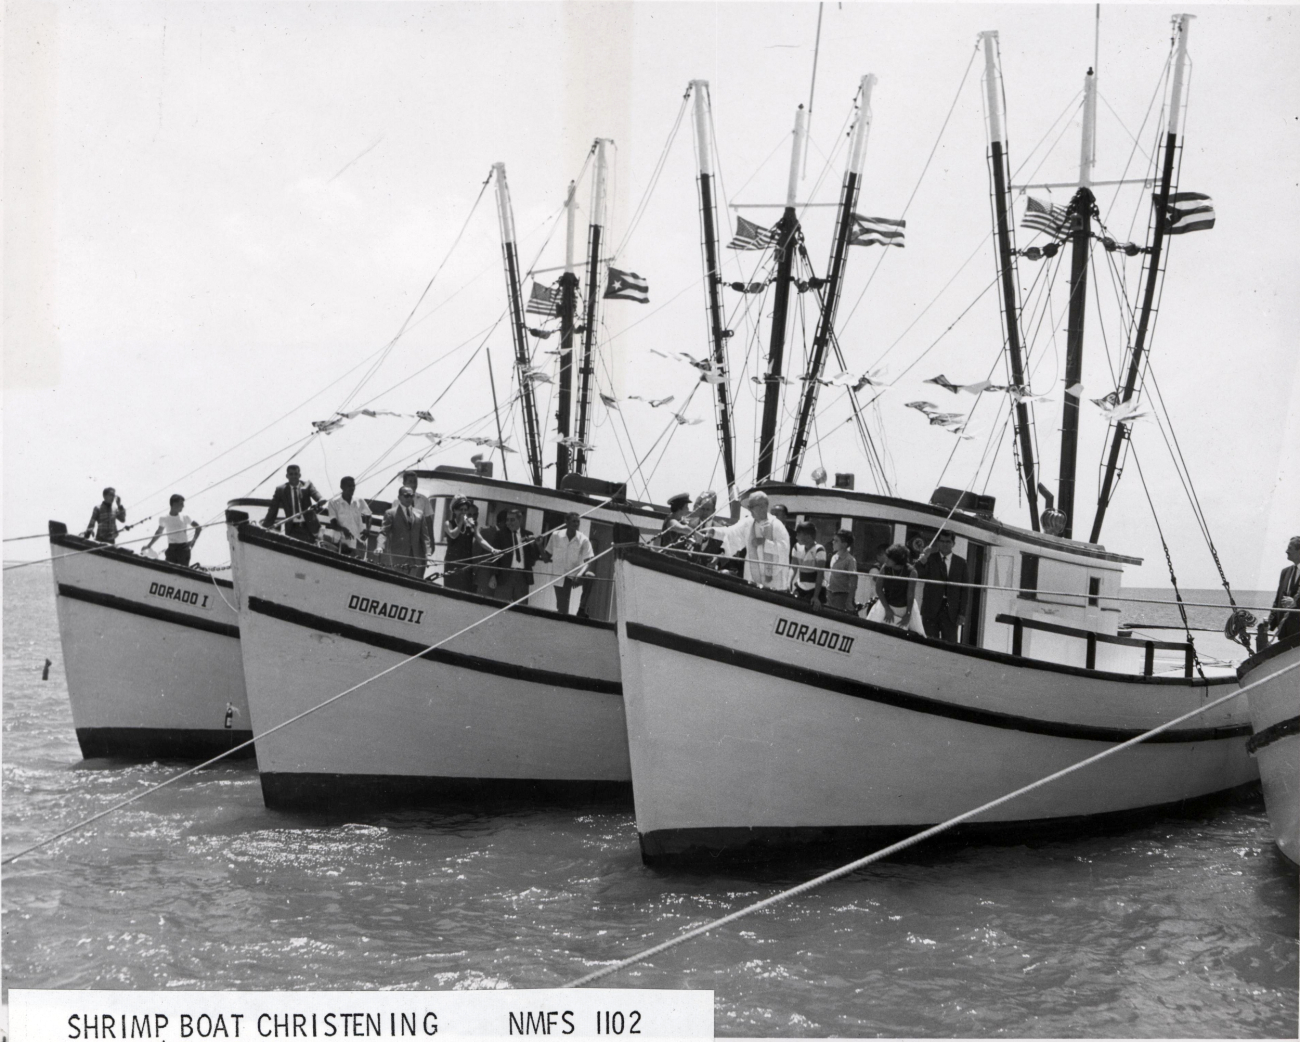 Christening of new shrimp boats acquired by the Dorado Fishing Cooperative inPuerto Rico